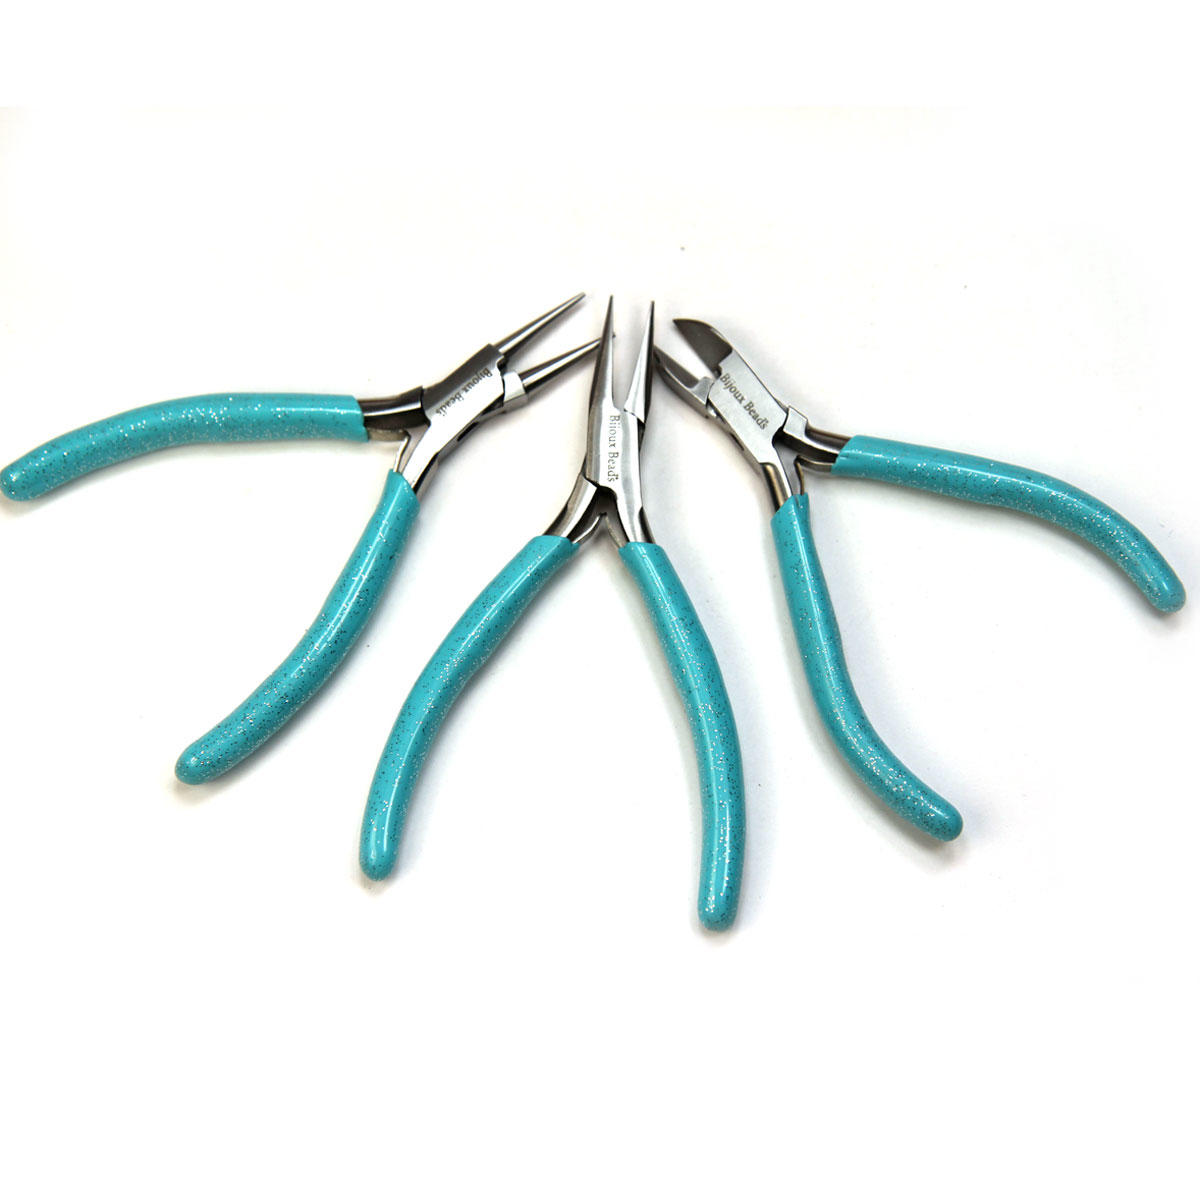 Pliers from Bijoux Beads